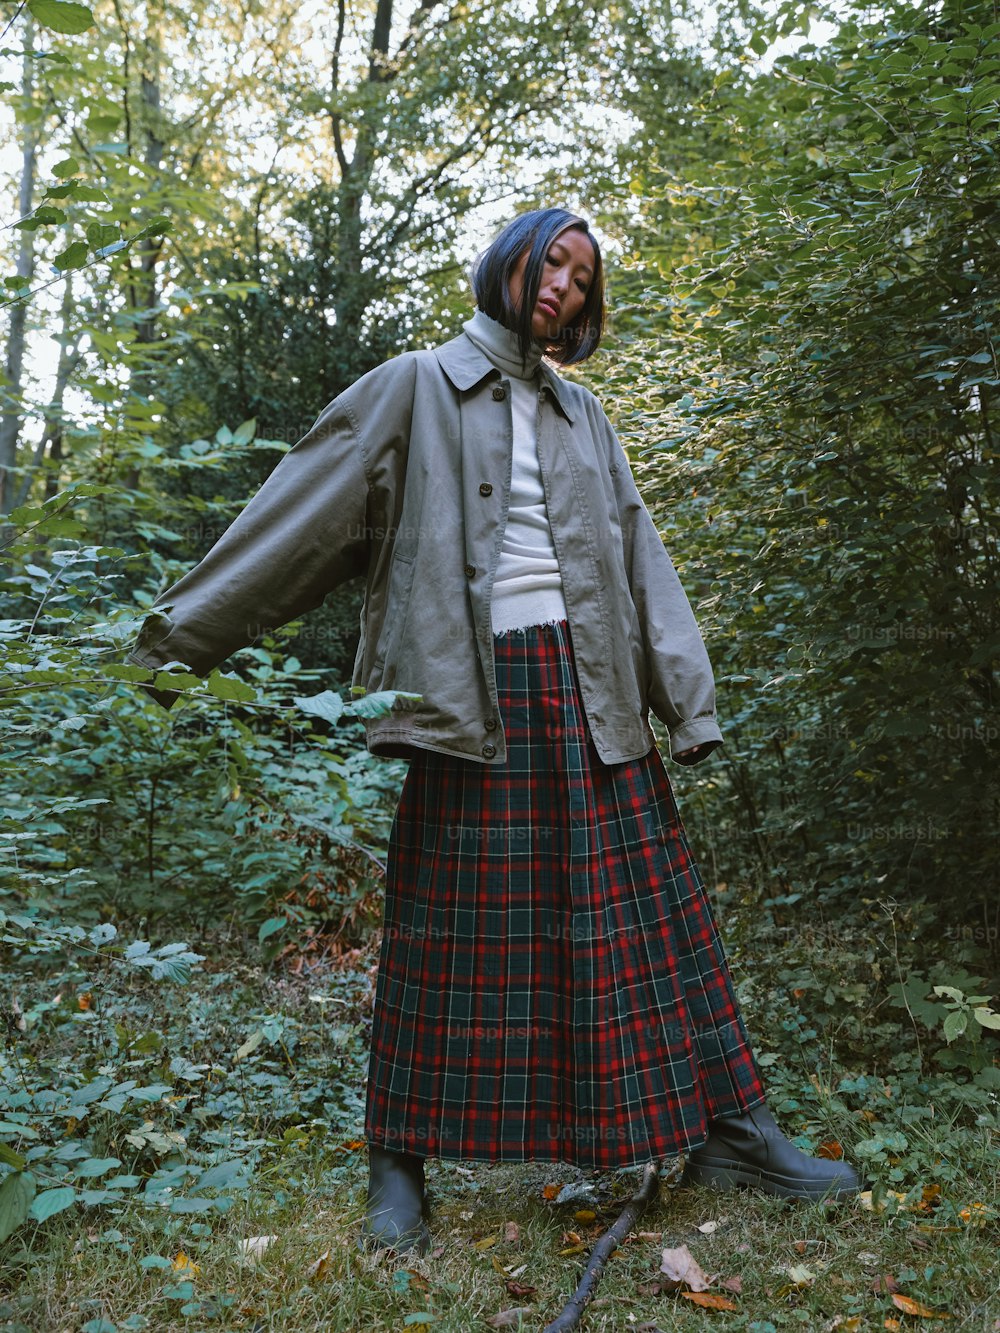 a woman standing in the woods wearing a skirt and jacket